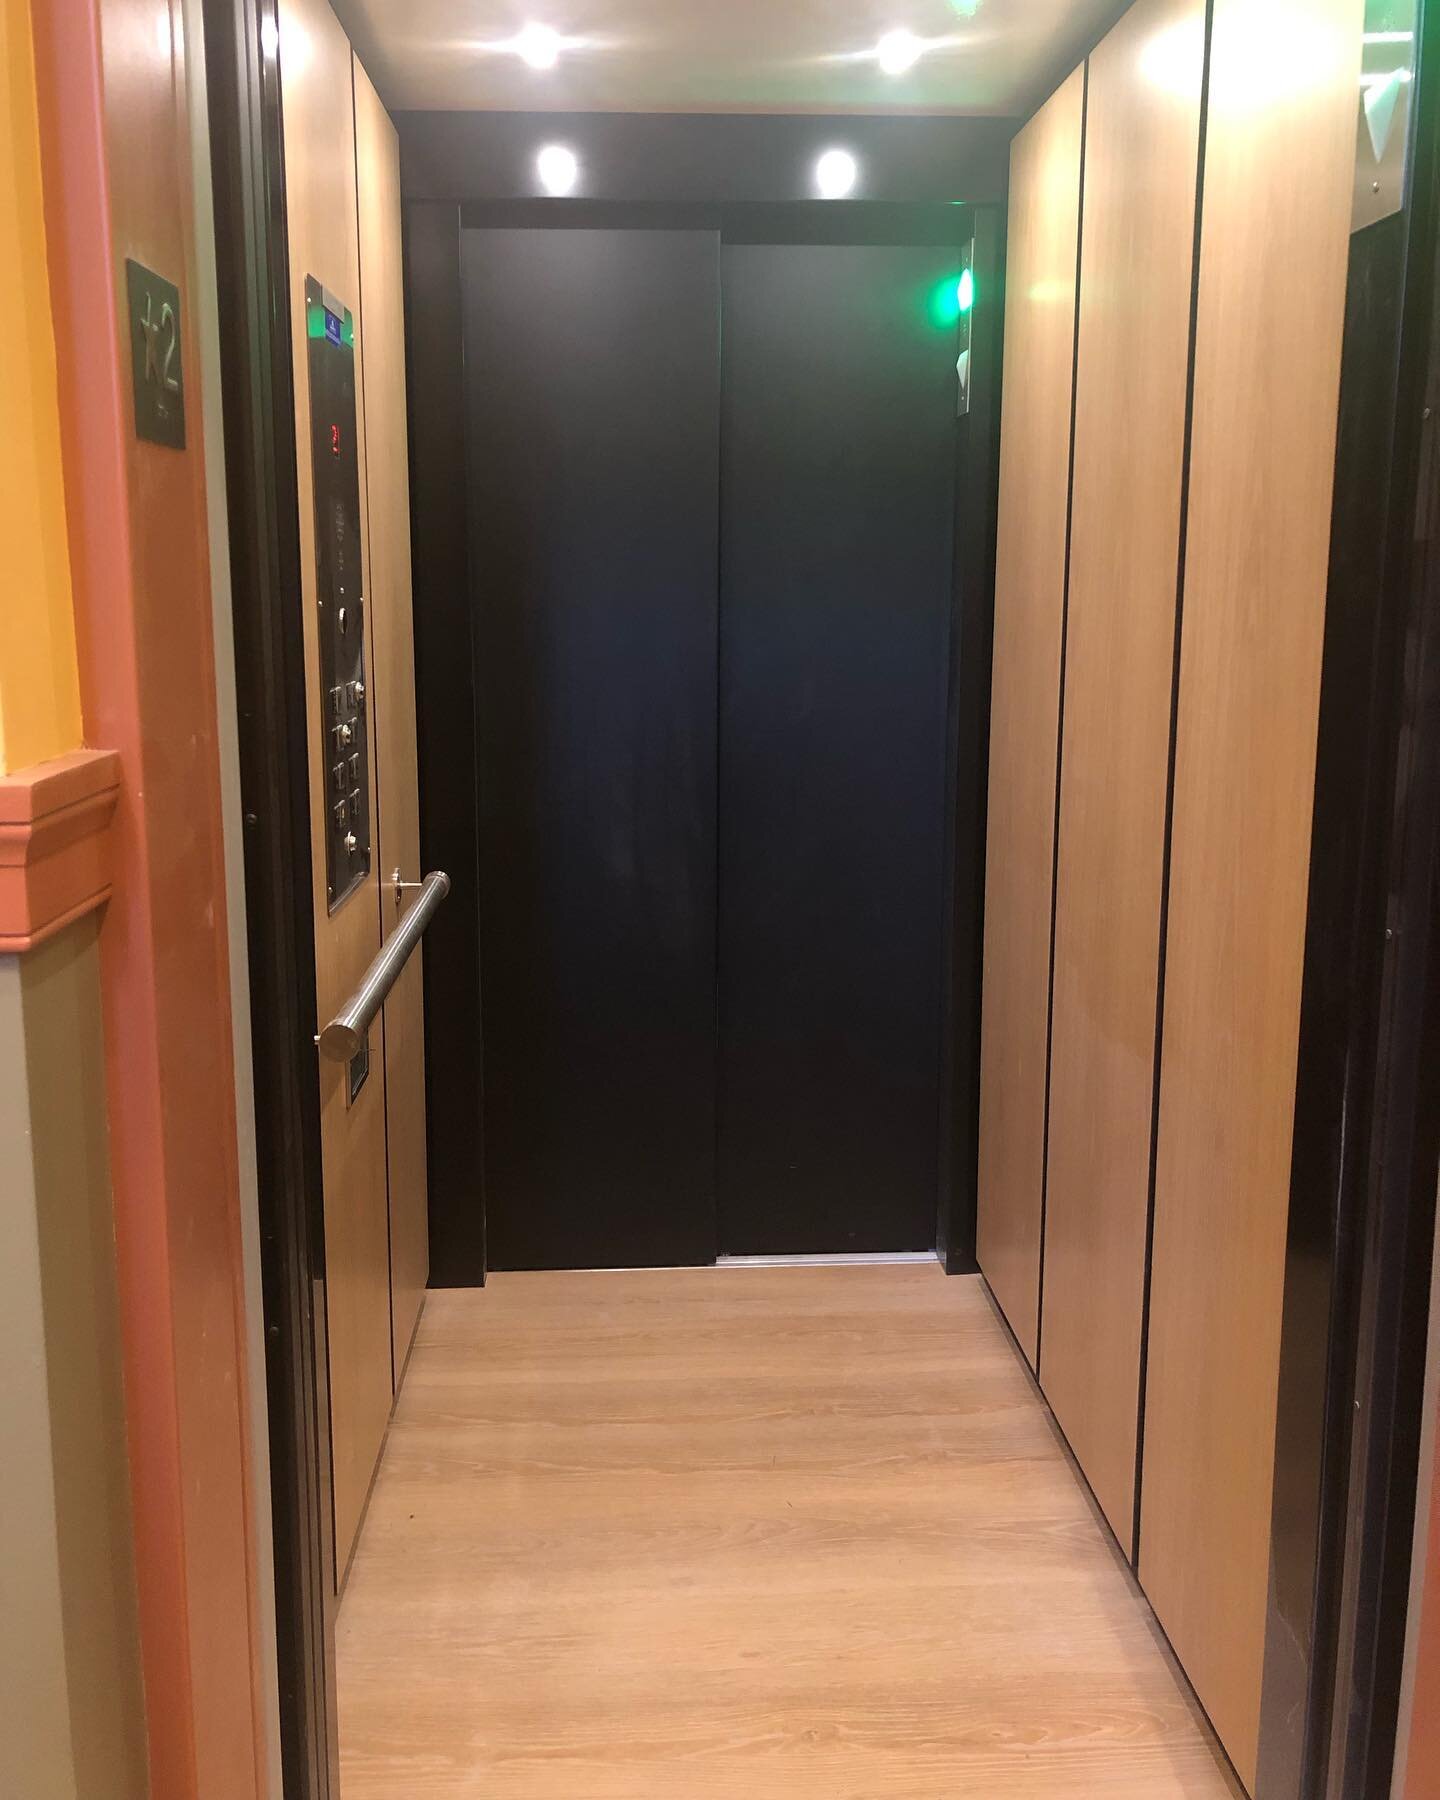 Sing it with us now&hellip;
🎶HALLELUJAH! 🎶
In all its glory!  The new elevator had its inaugural rides by some Footlight Board of Director members and patrons of A Carol Christmas!  Our &ldquo;soft opening&rdquo; was a massive success!  A few more 